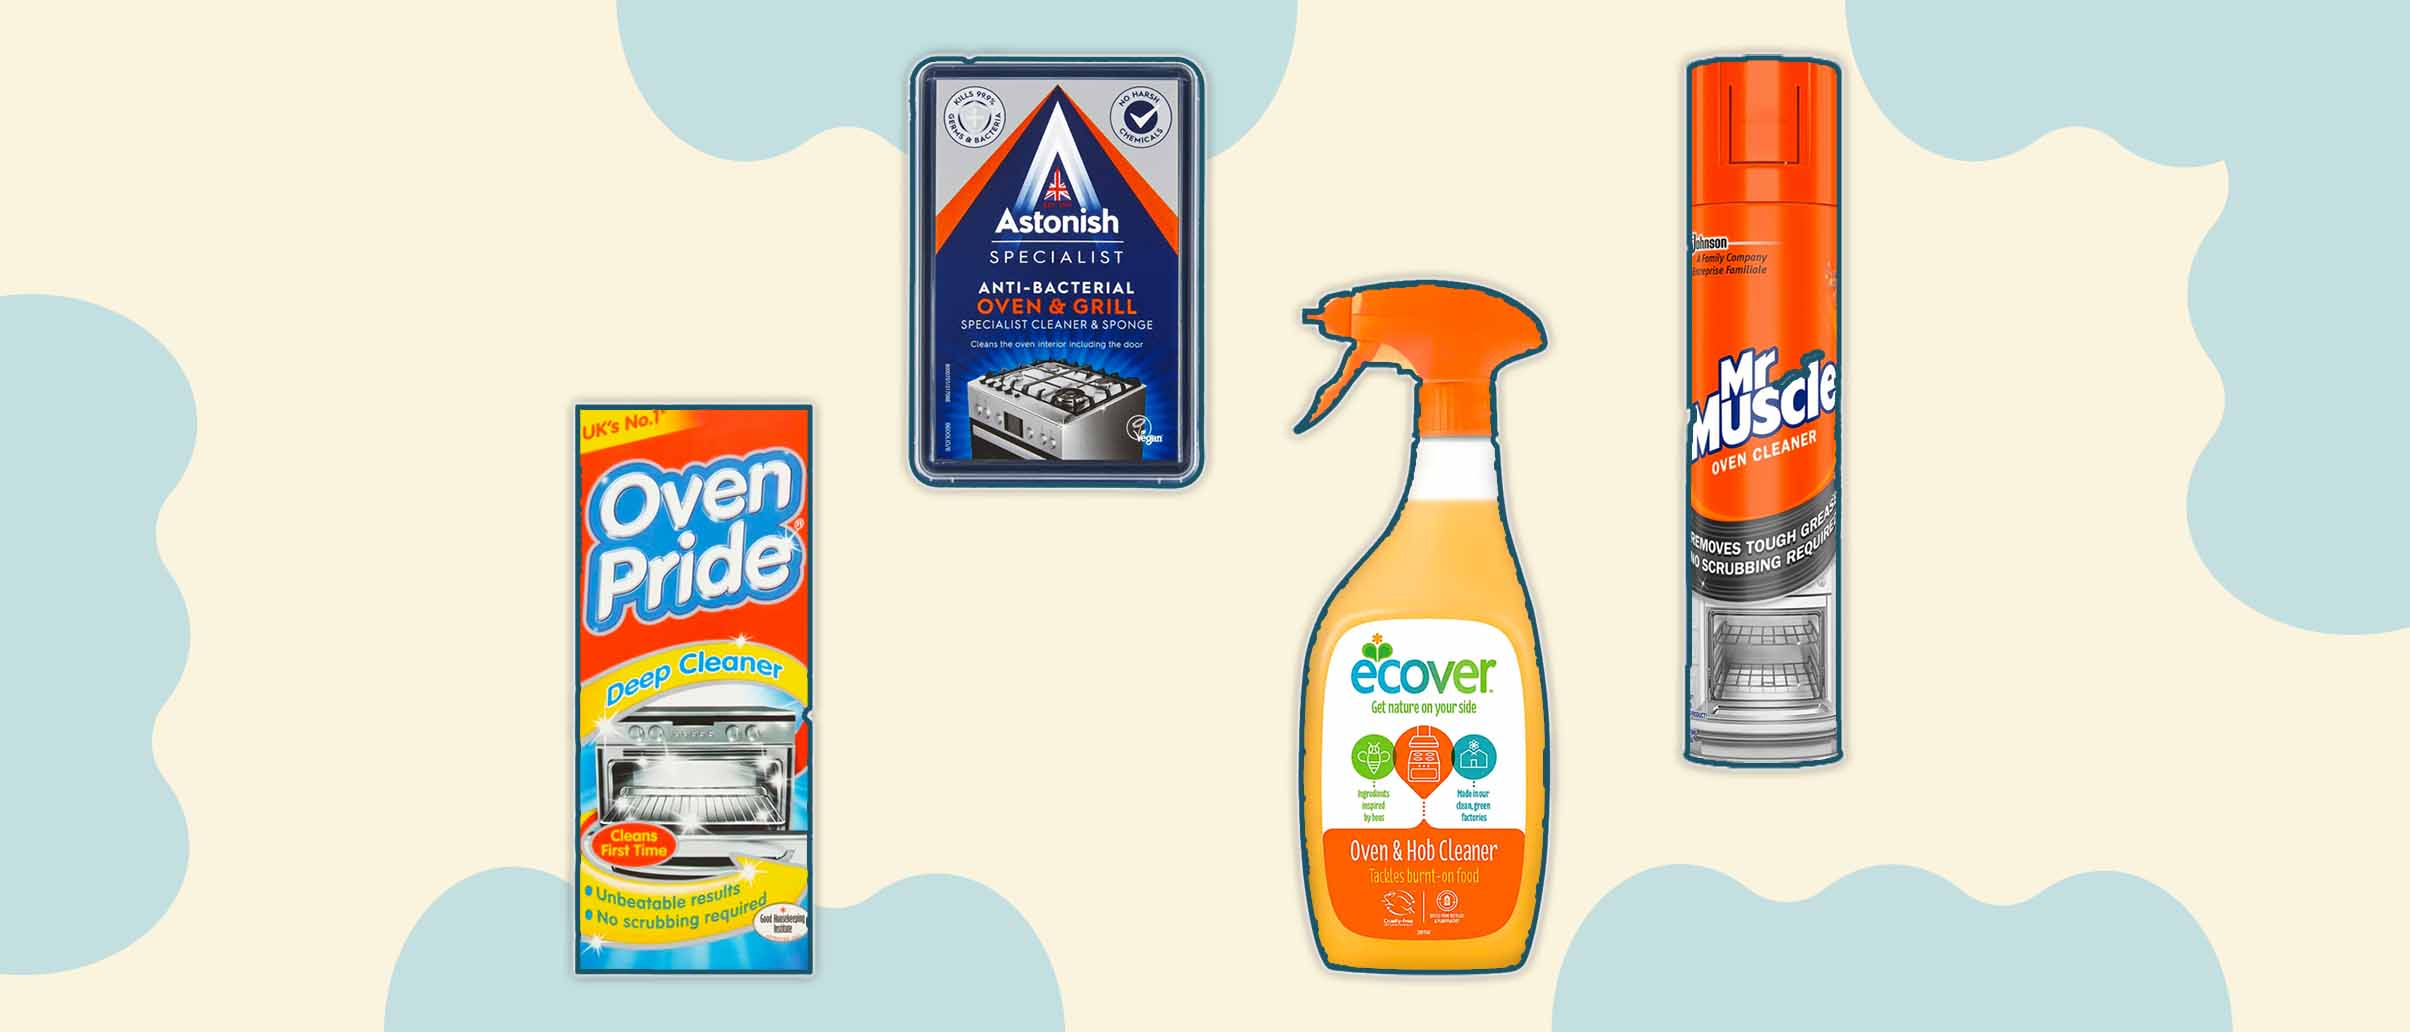 Stove Cleaner, Dirtbusters Stove Cleaner